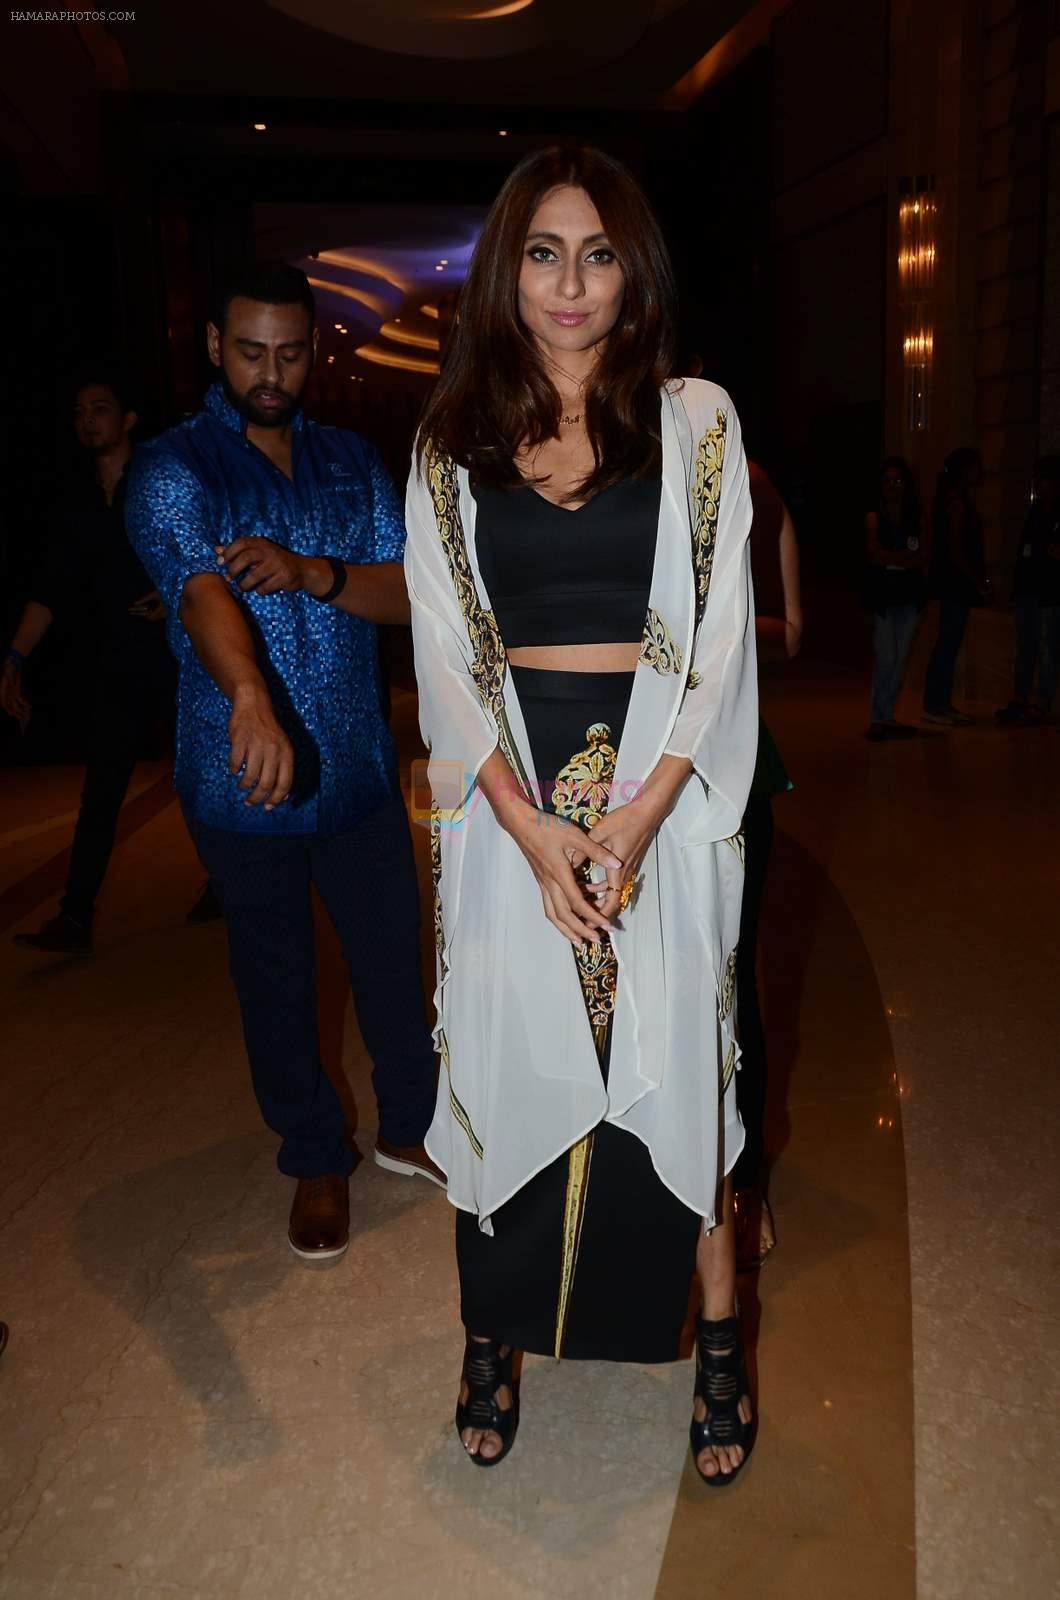 Anusha Dandekar at Smile Foundations Fashion Show Ramp for Champs, a fashion show for education of underpriveledged children on 2nd Aug 2015